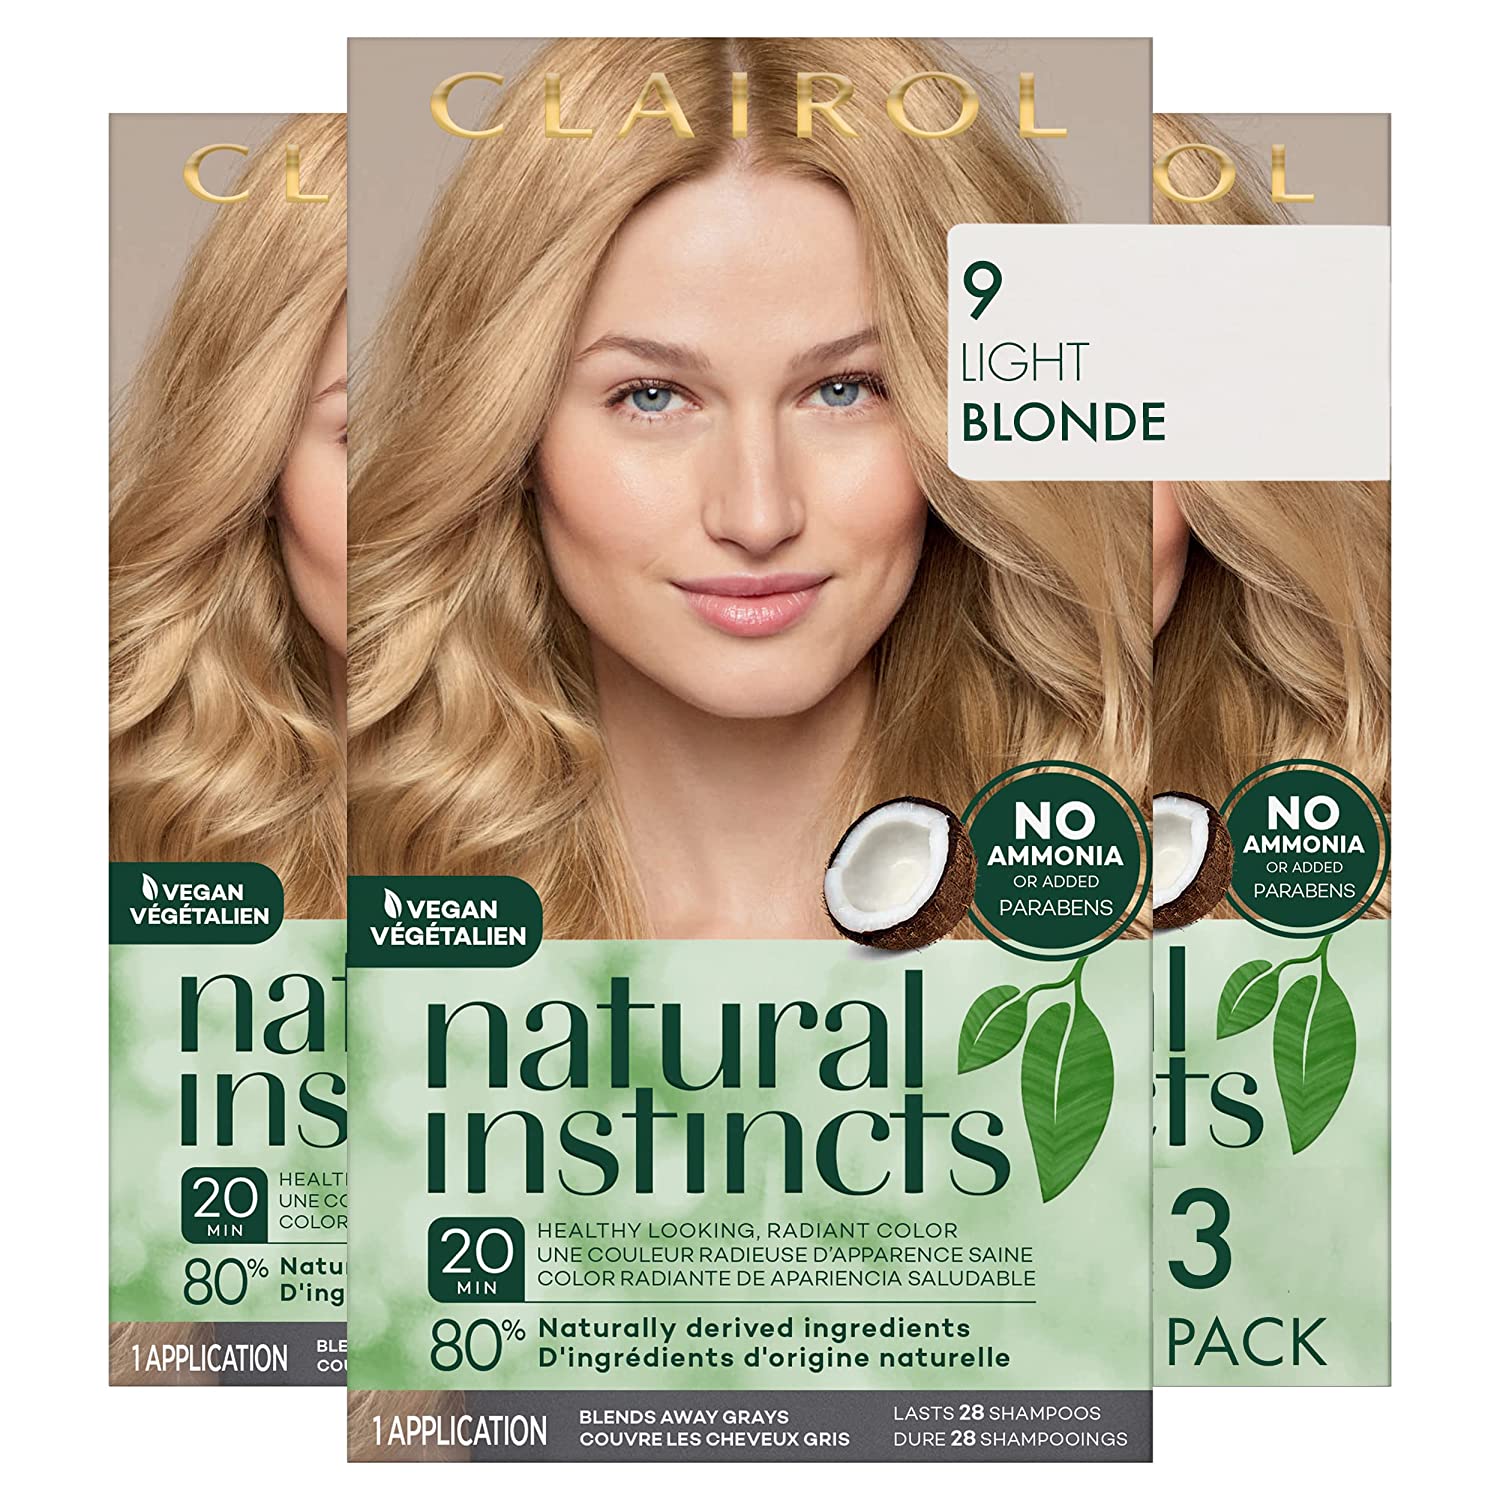  1. Clairol Natural Instincts: Best Overall 